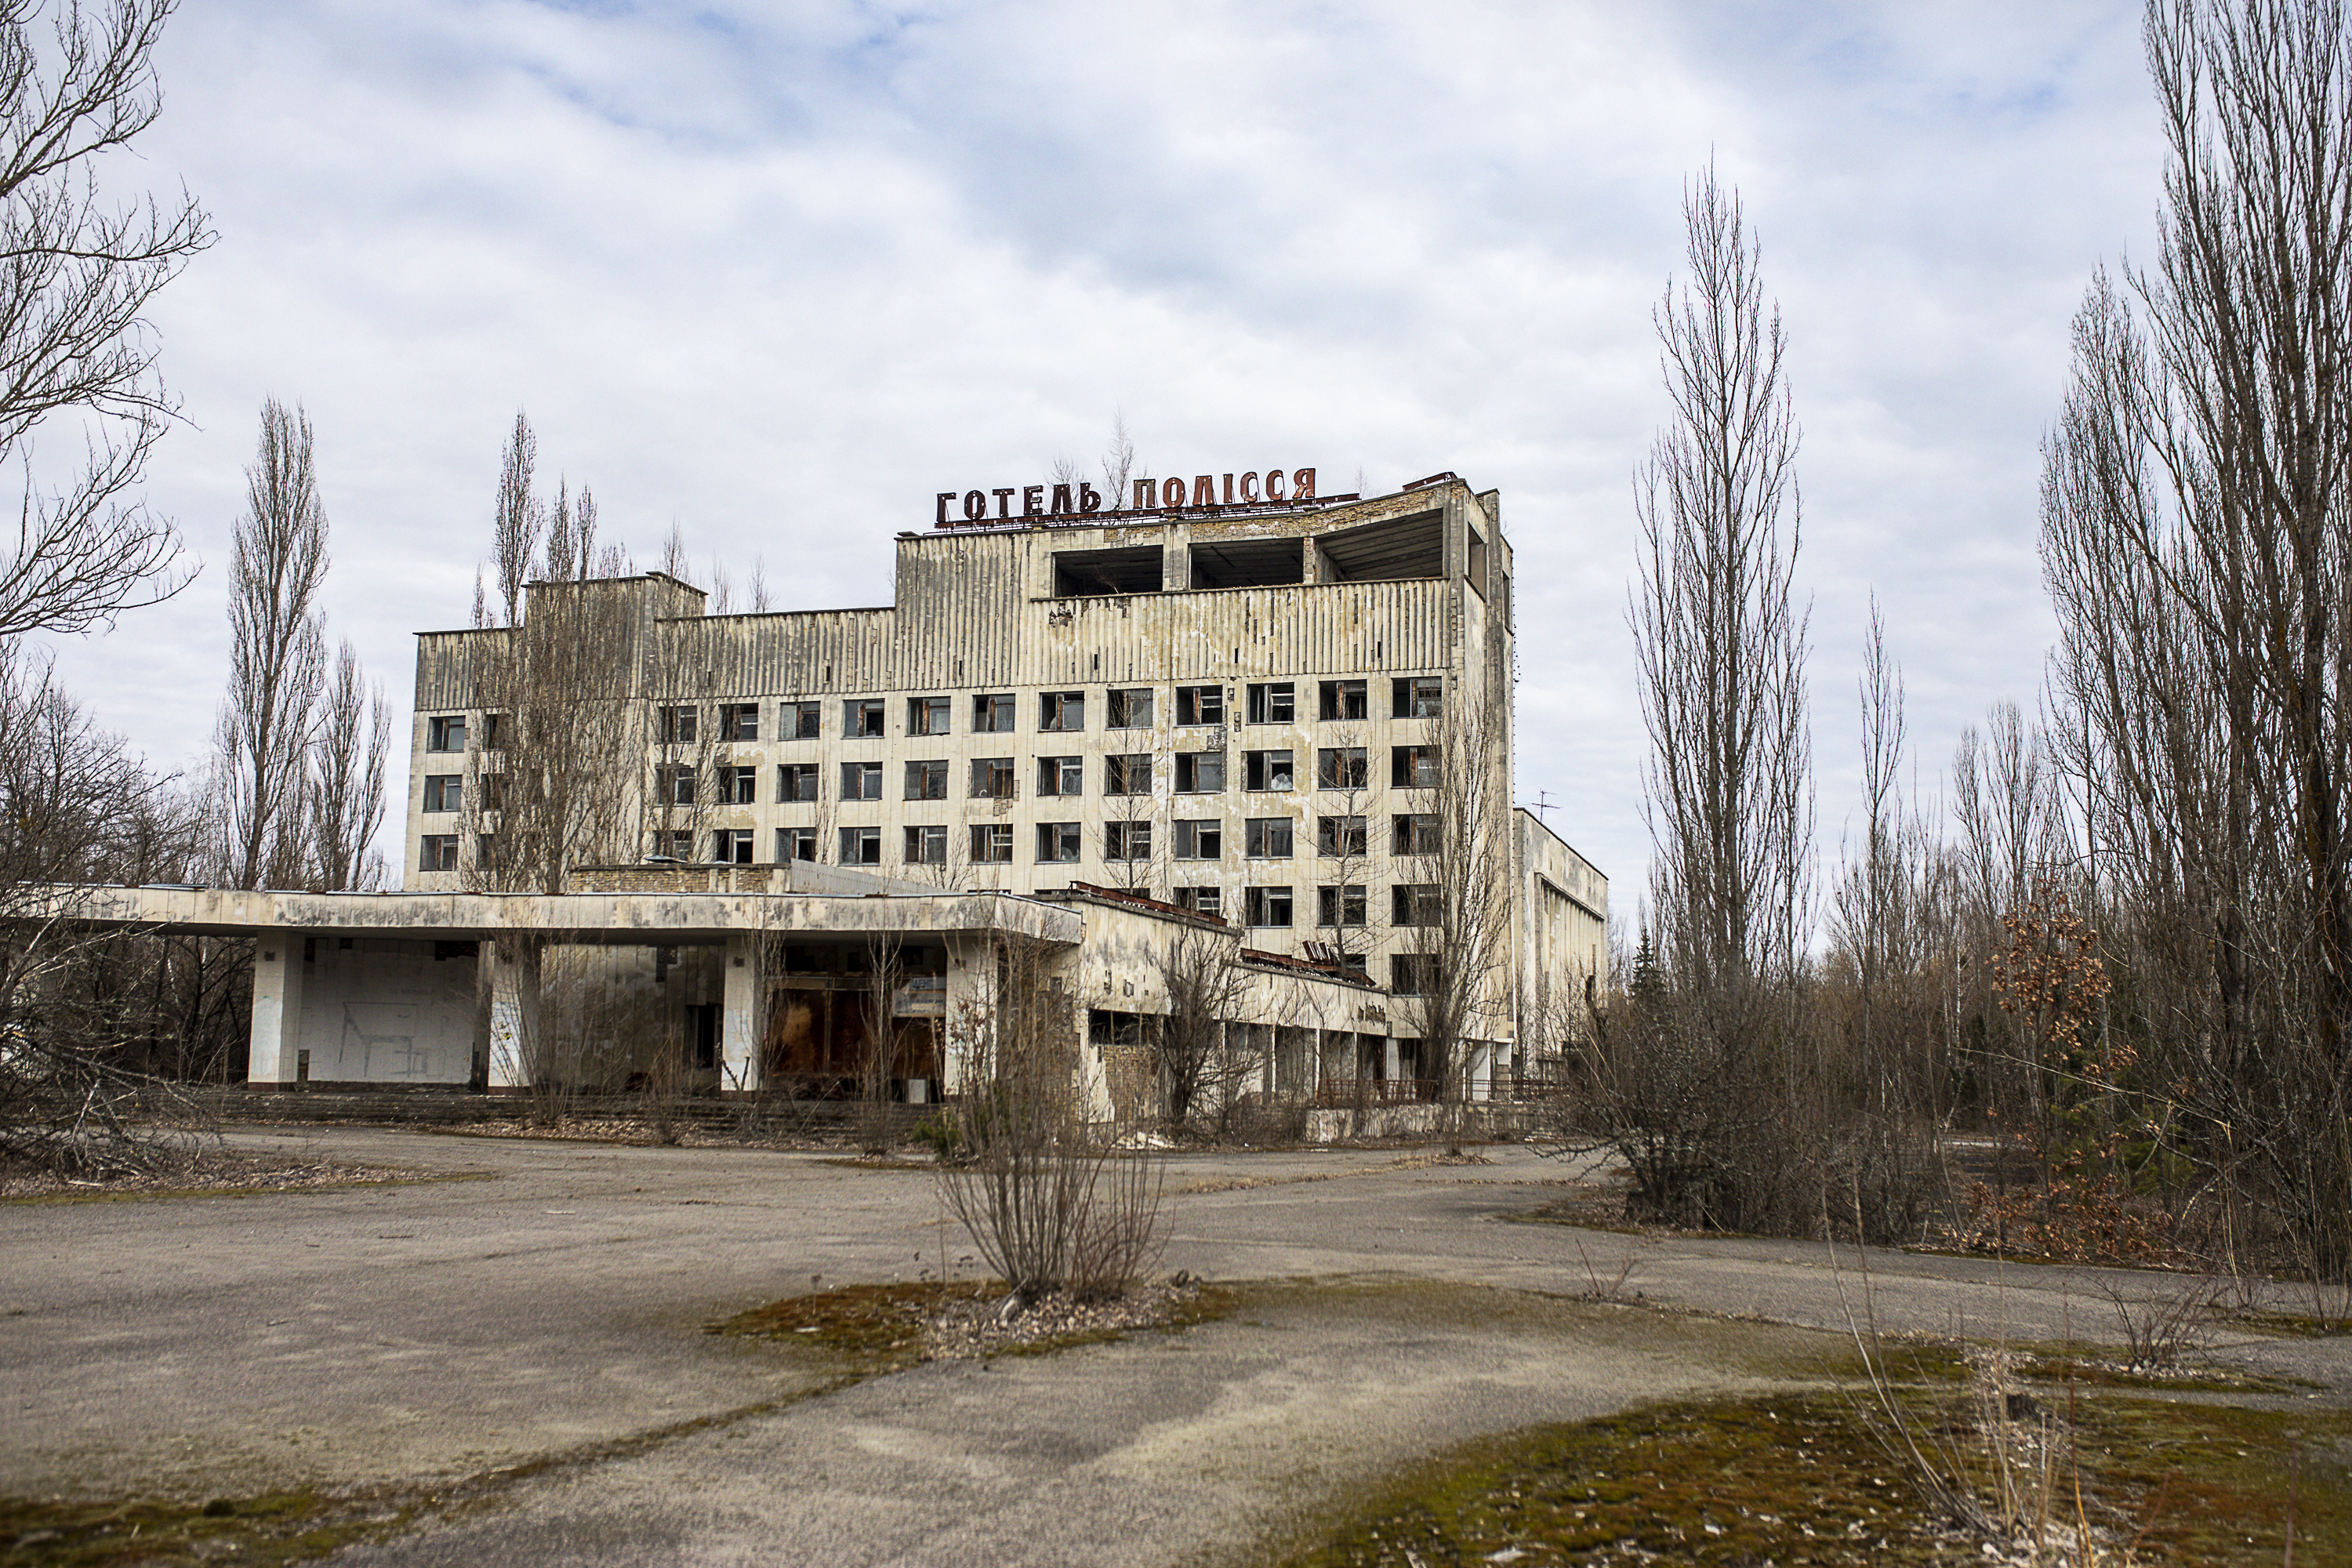 chernobyl, nucleare, ambiente, salute, ricorrenza, terra